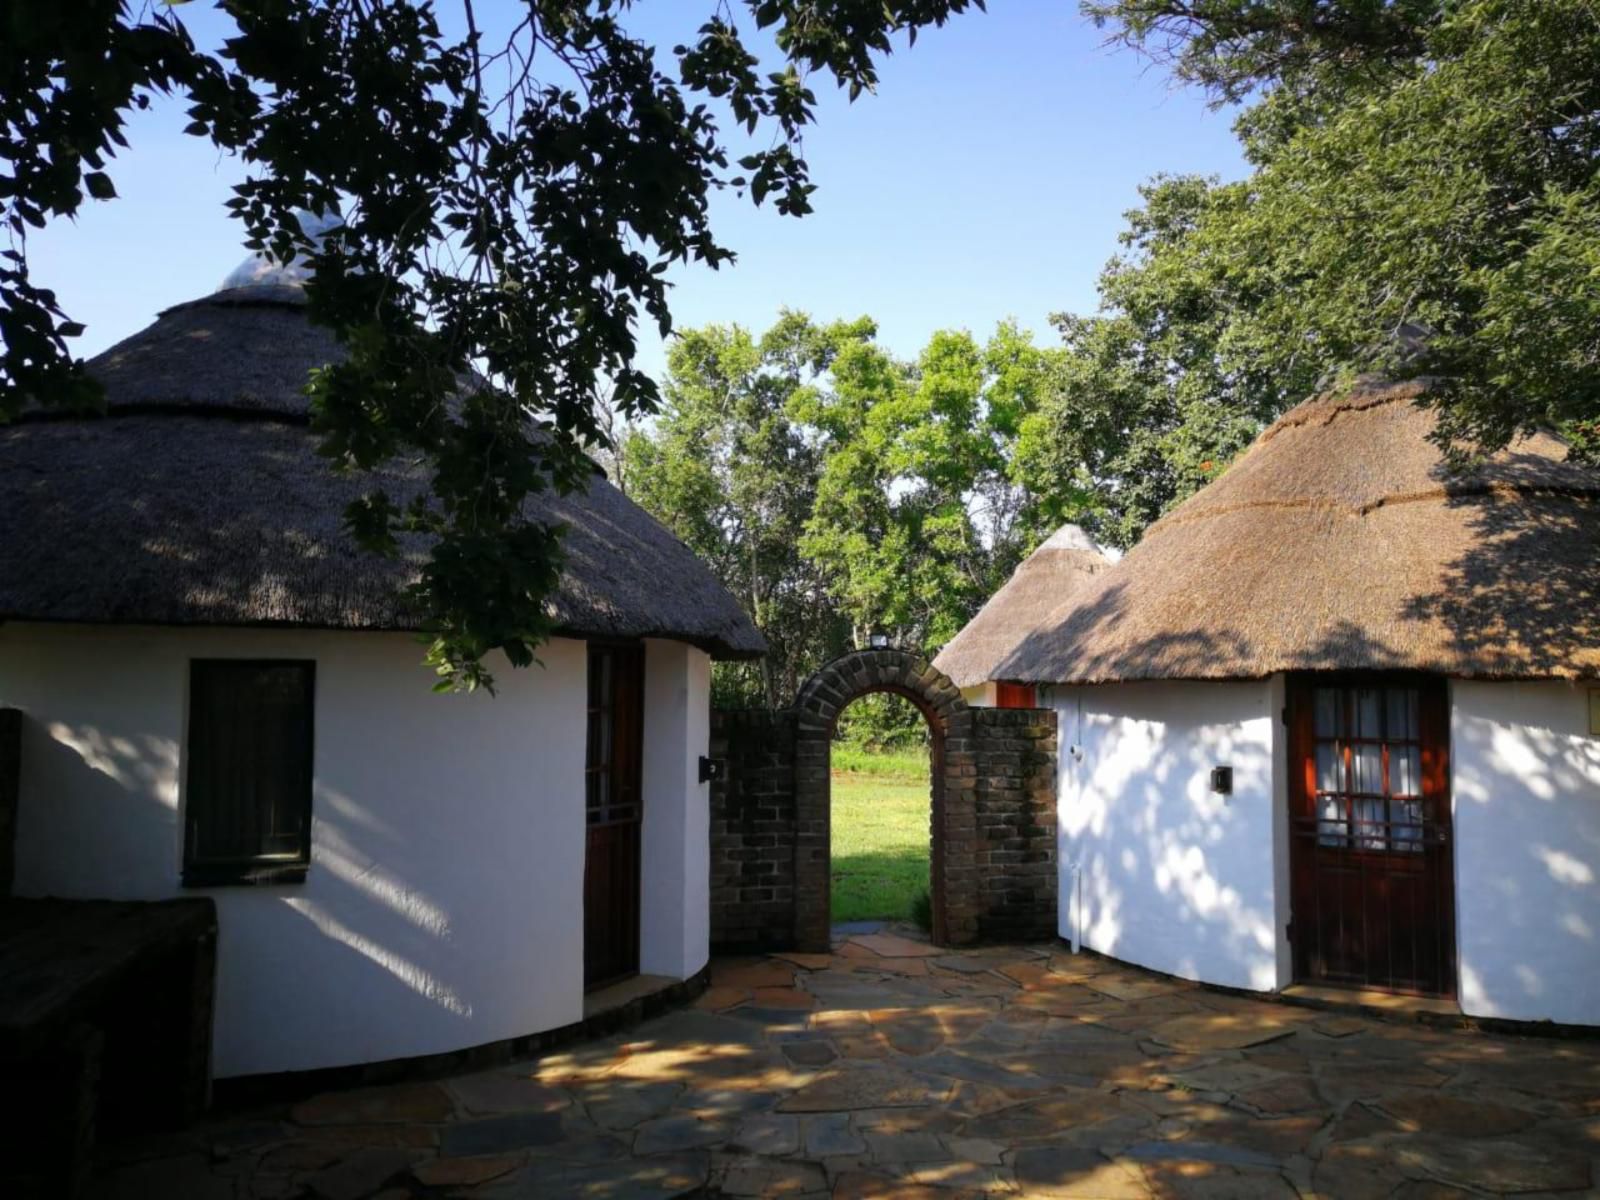 Stone Hounds Lodge Hekpoort Krugersdorp North West Province South Africa Building, Architecture